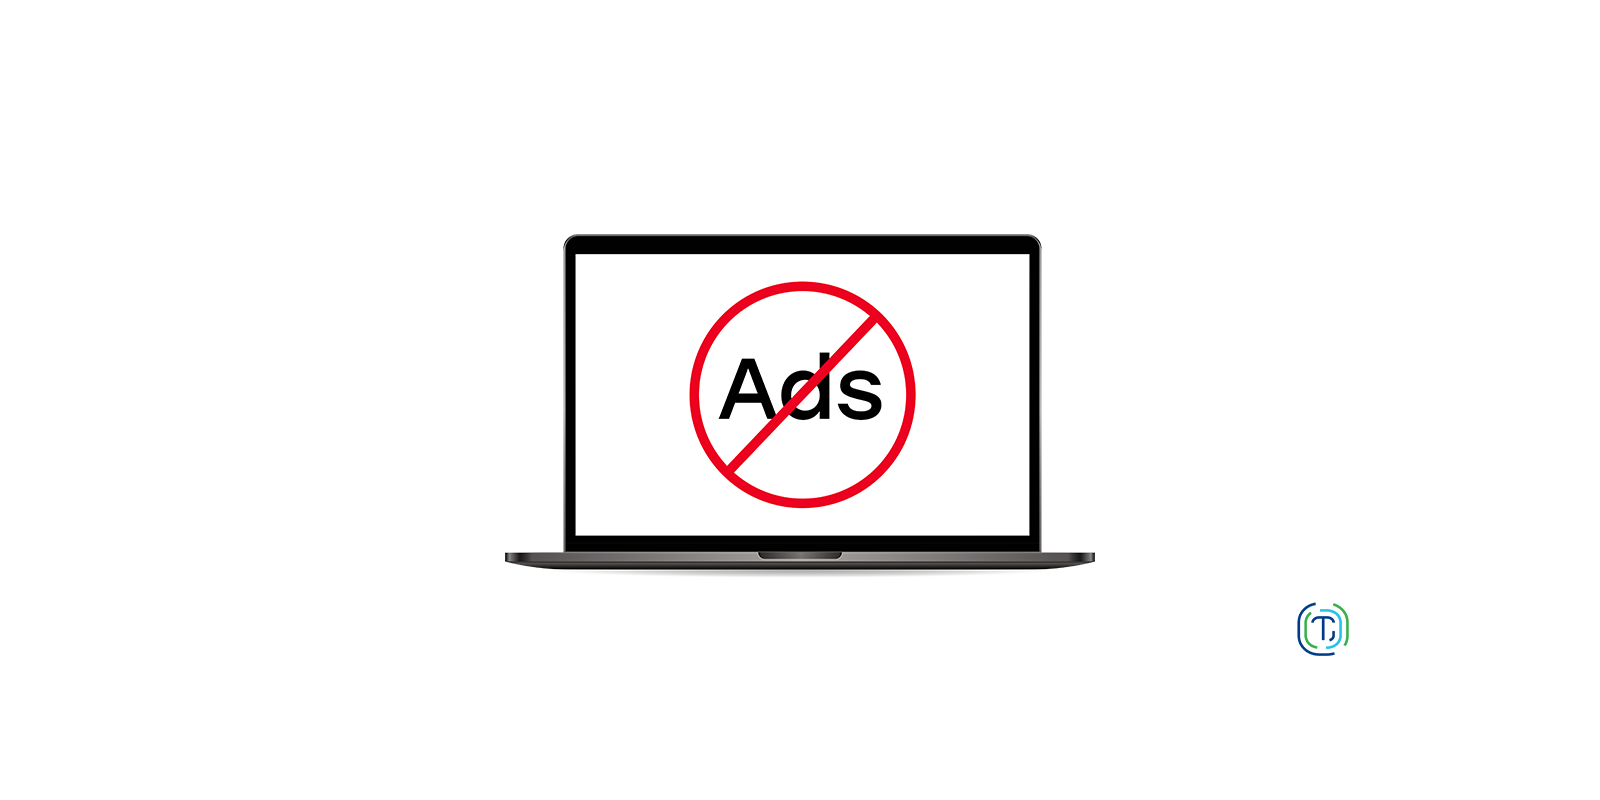 Meta’s Ad Ban Is Bad News for Purpose-Driven Marketing - Here’s a Solution